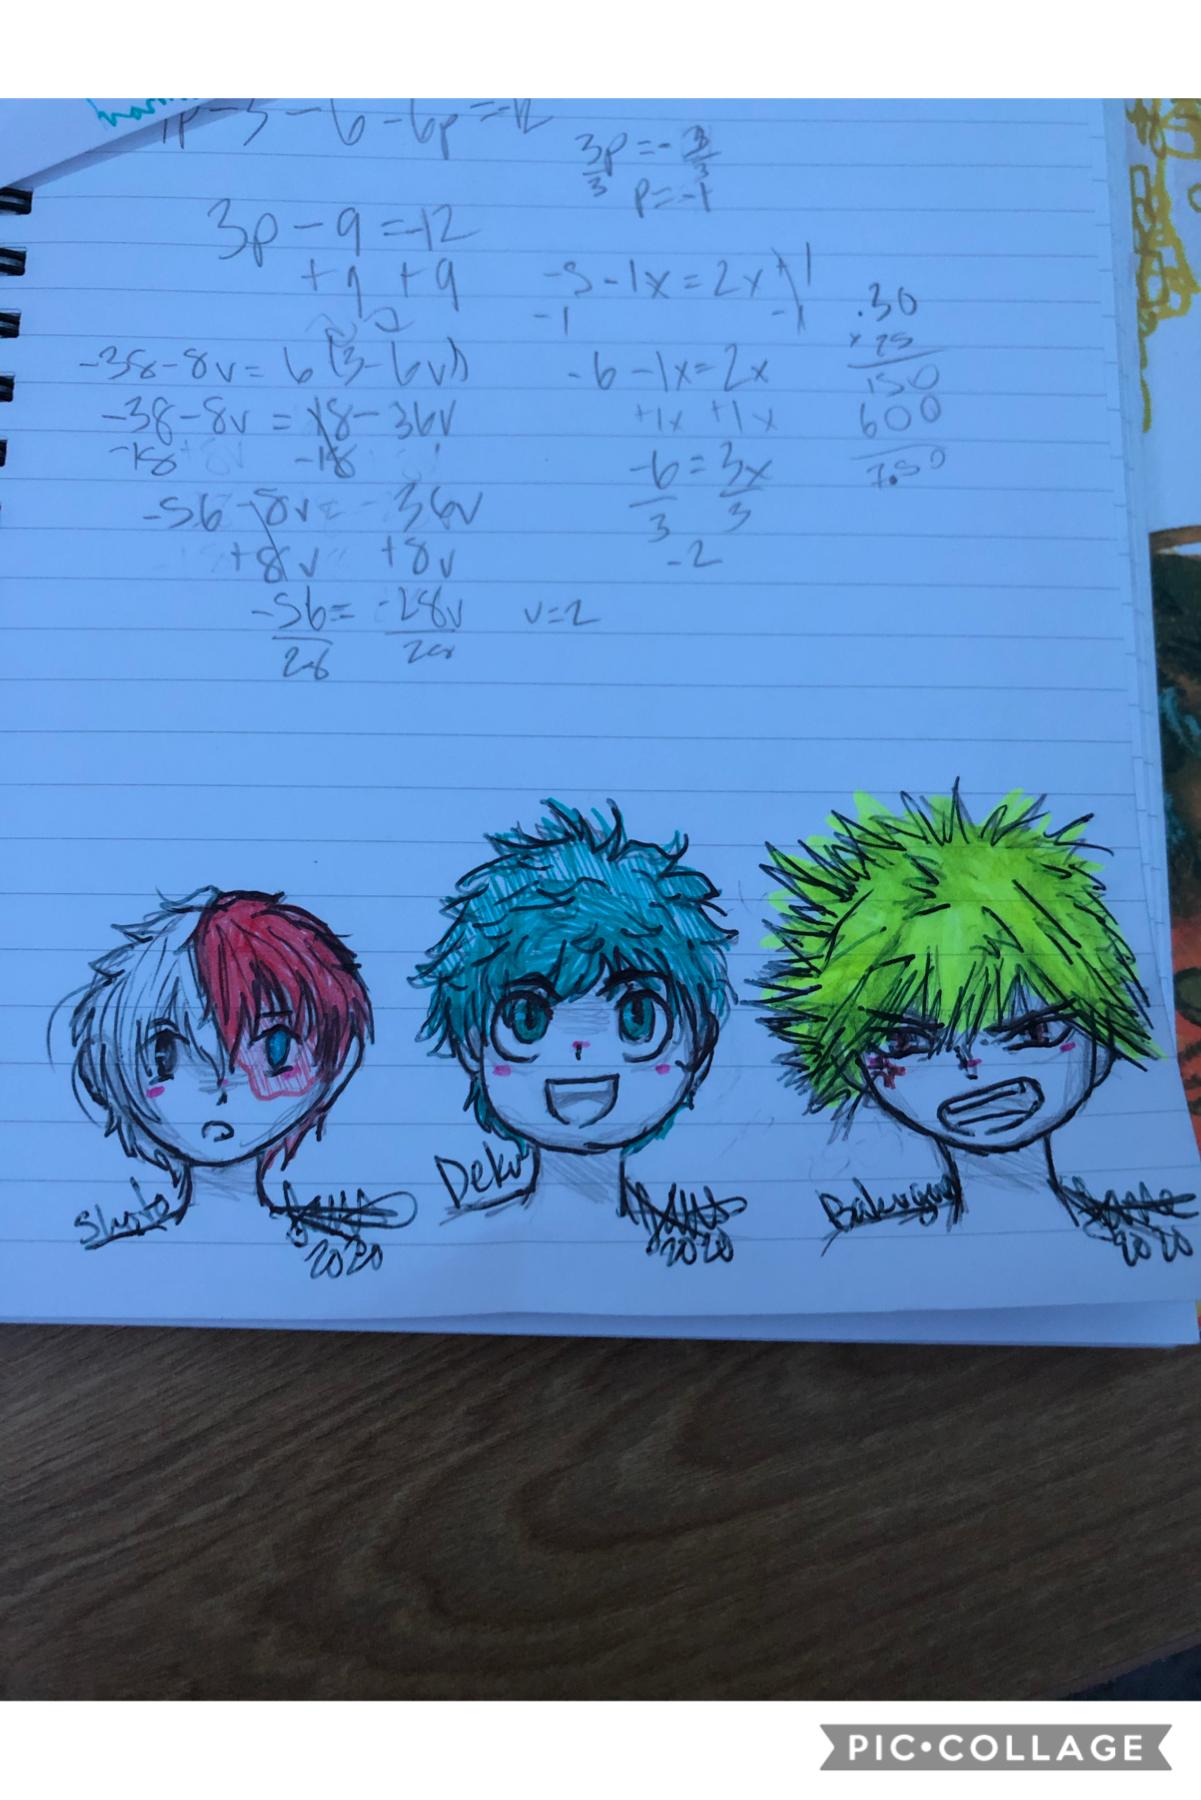 lookin pretty good for a dead bxtçh (she’s aliveeee) anyways here are some sketches of Shoto, Izuku and Katsuki :)